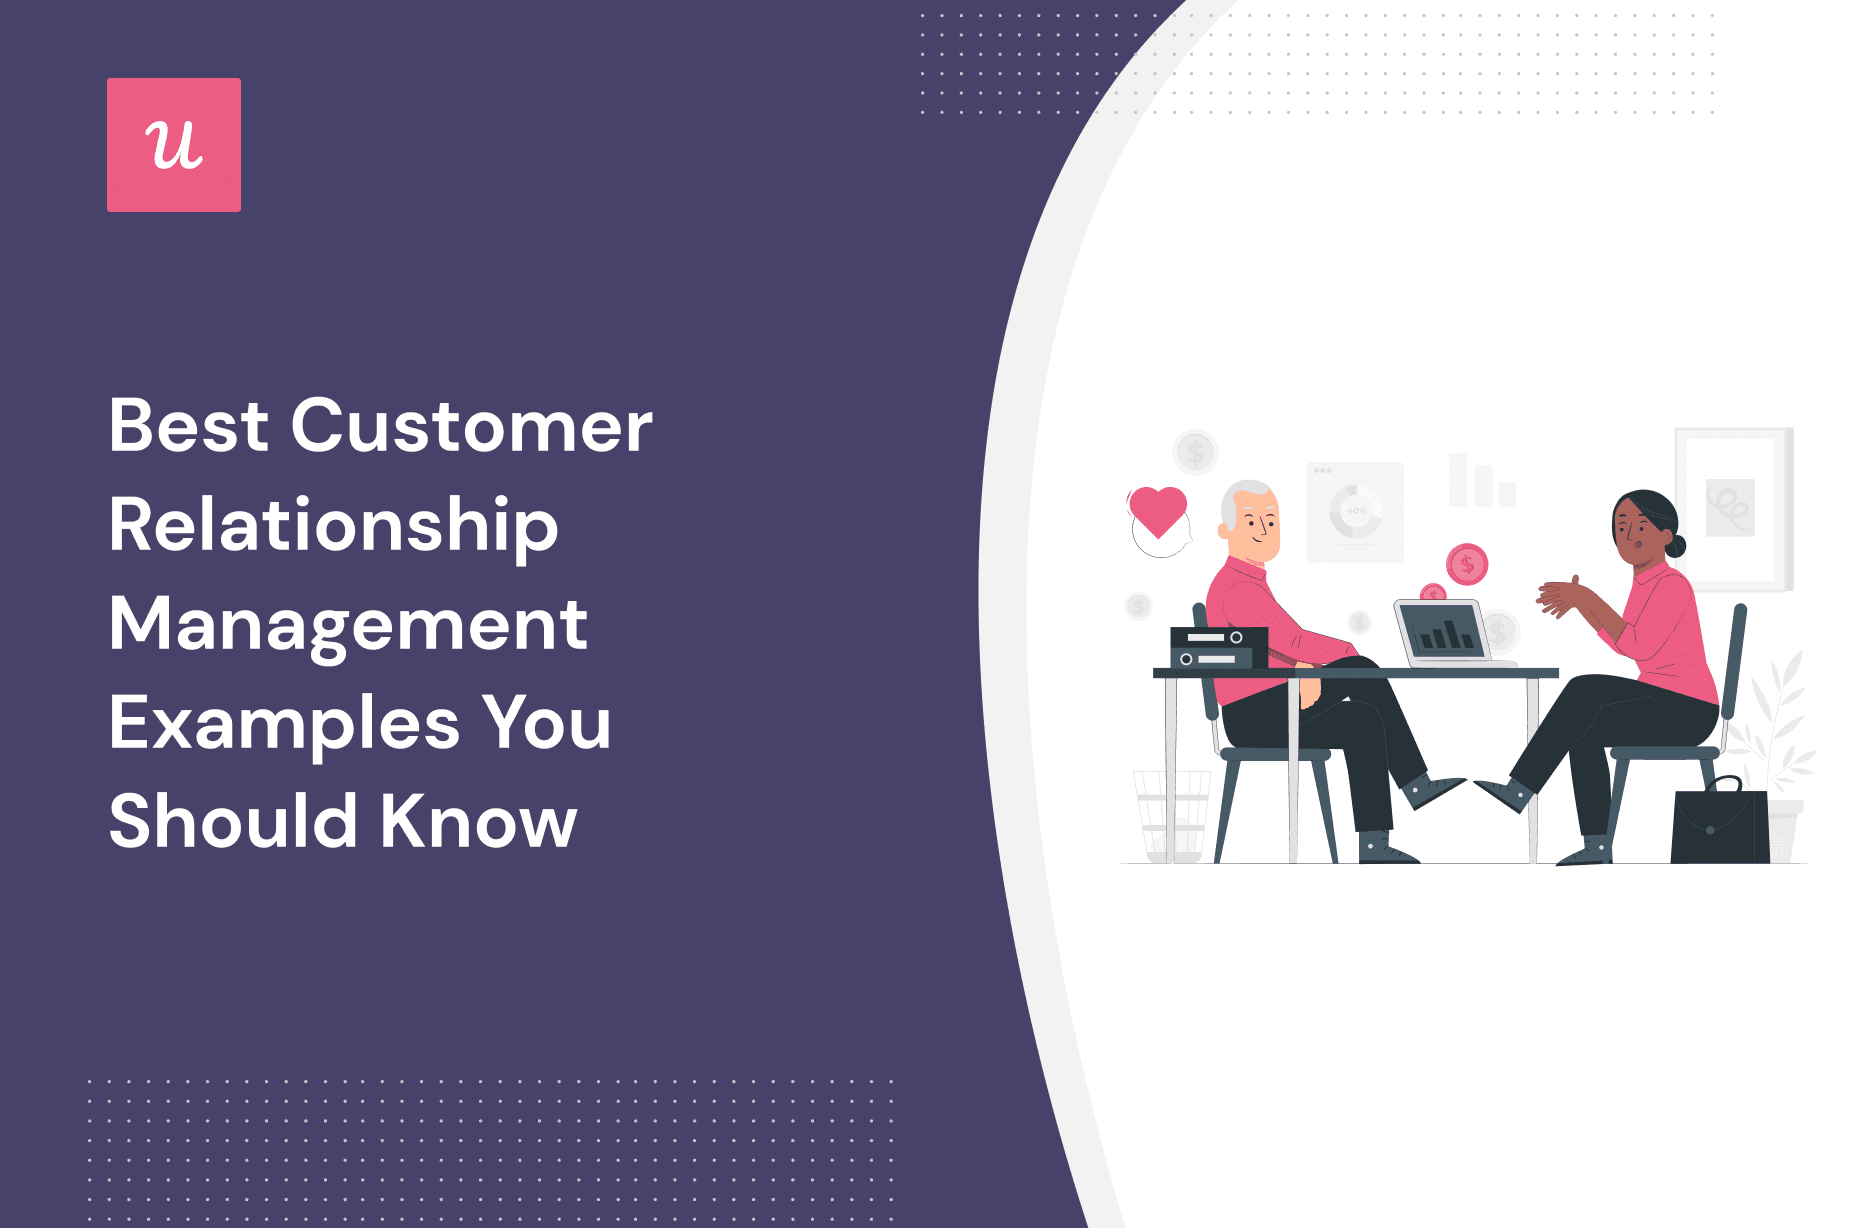 Best Customer Relationship Management Examples You Should Know cover